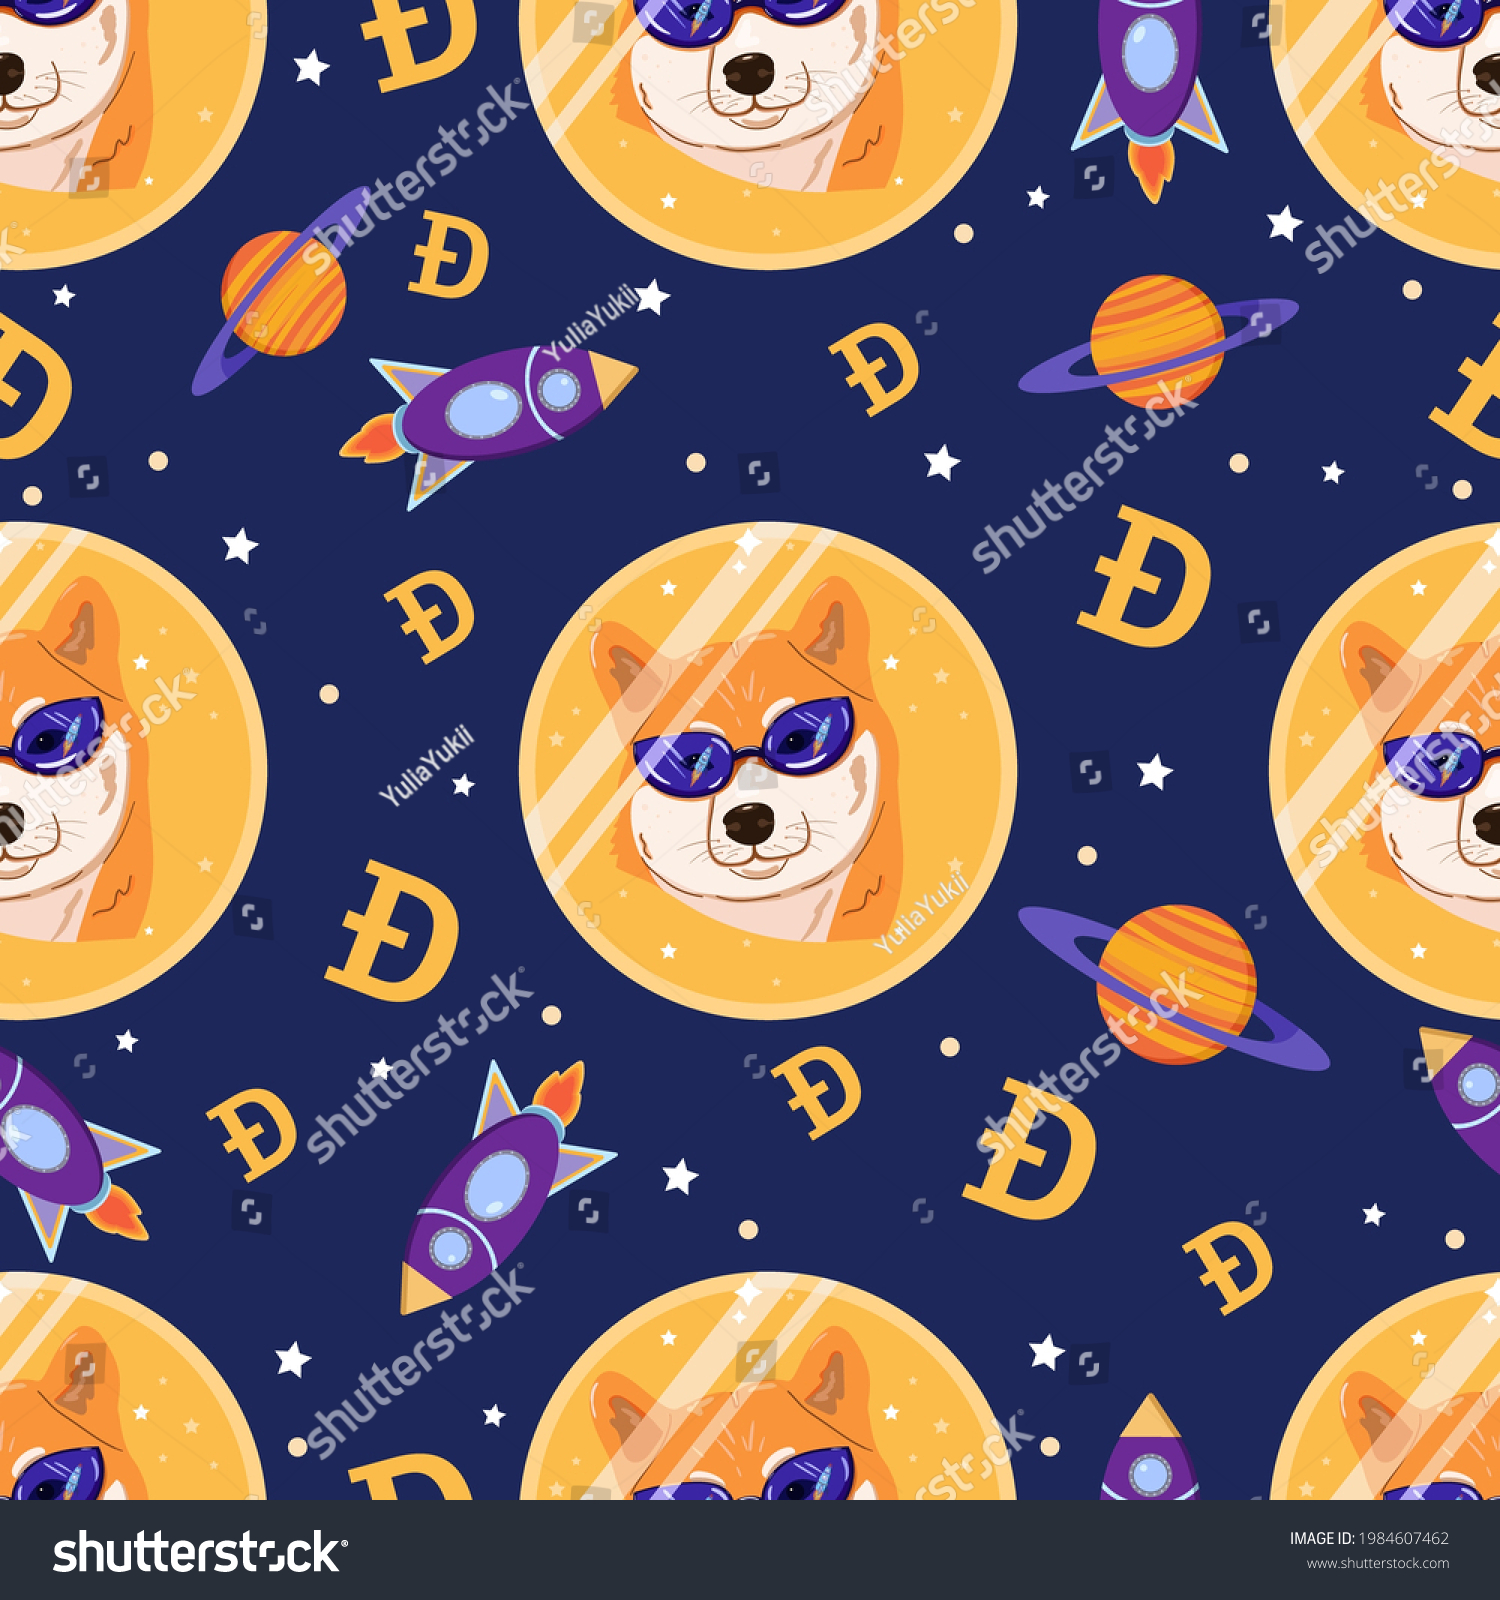 SVG of Dogecoin seamless pattern. Cryptocurrency shiba doge in space background with planets, stars. Virtual investment concept. Vector illustration. svg